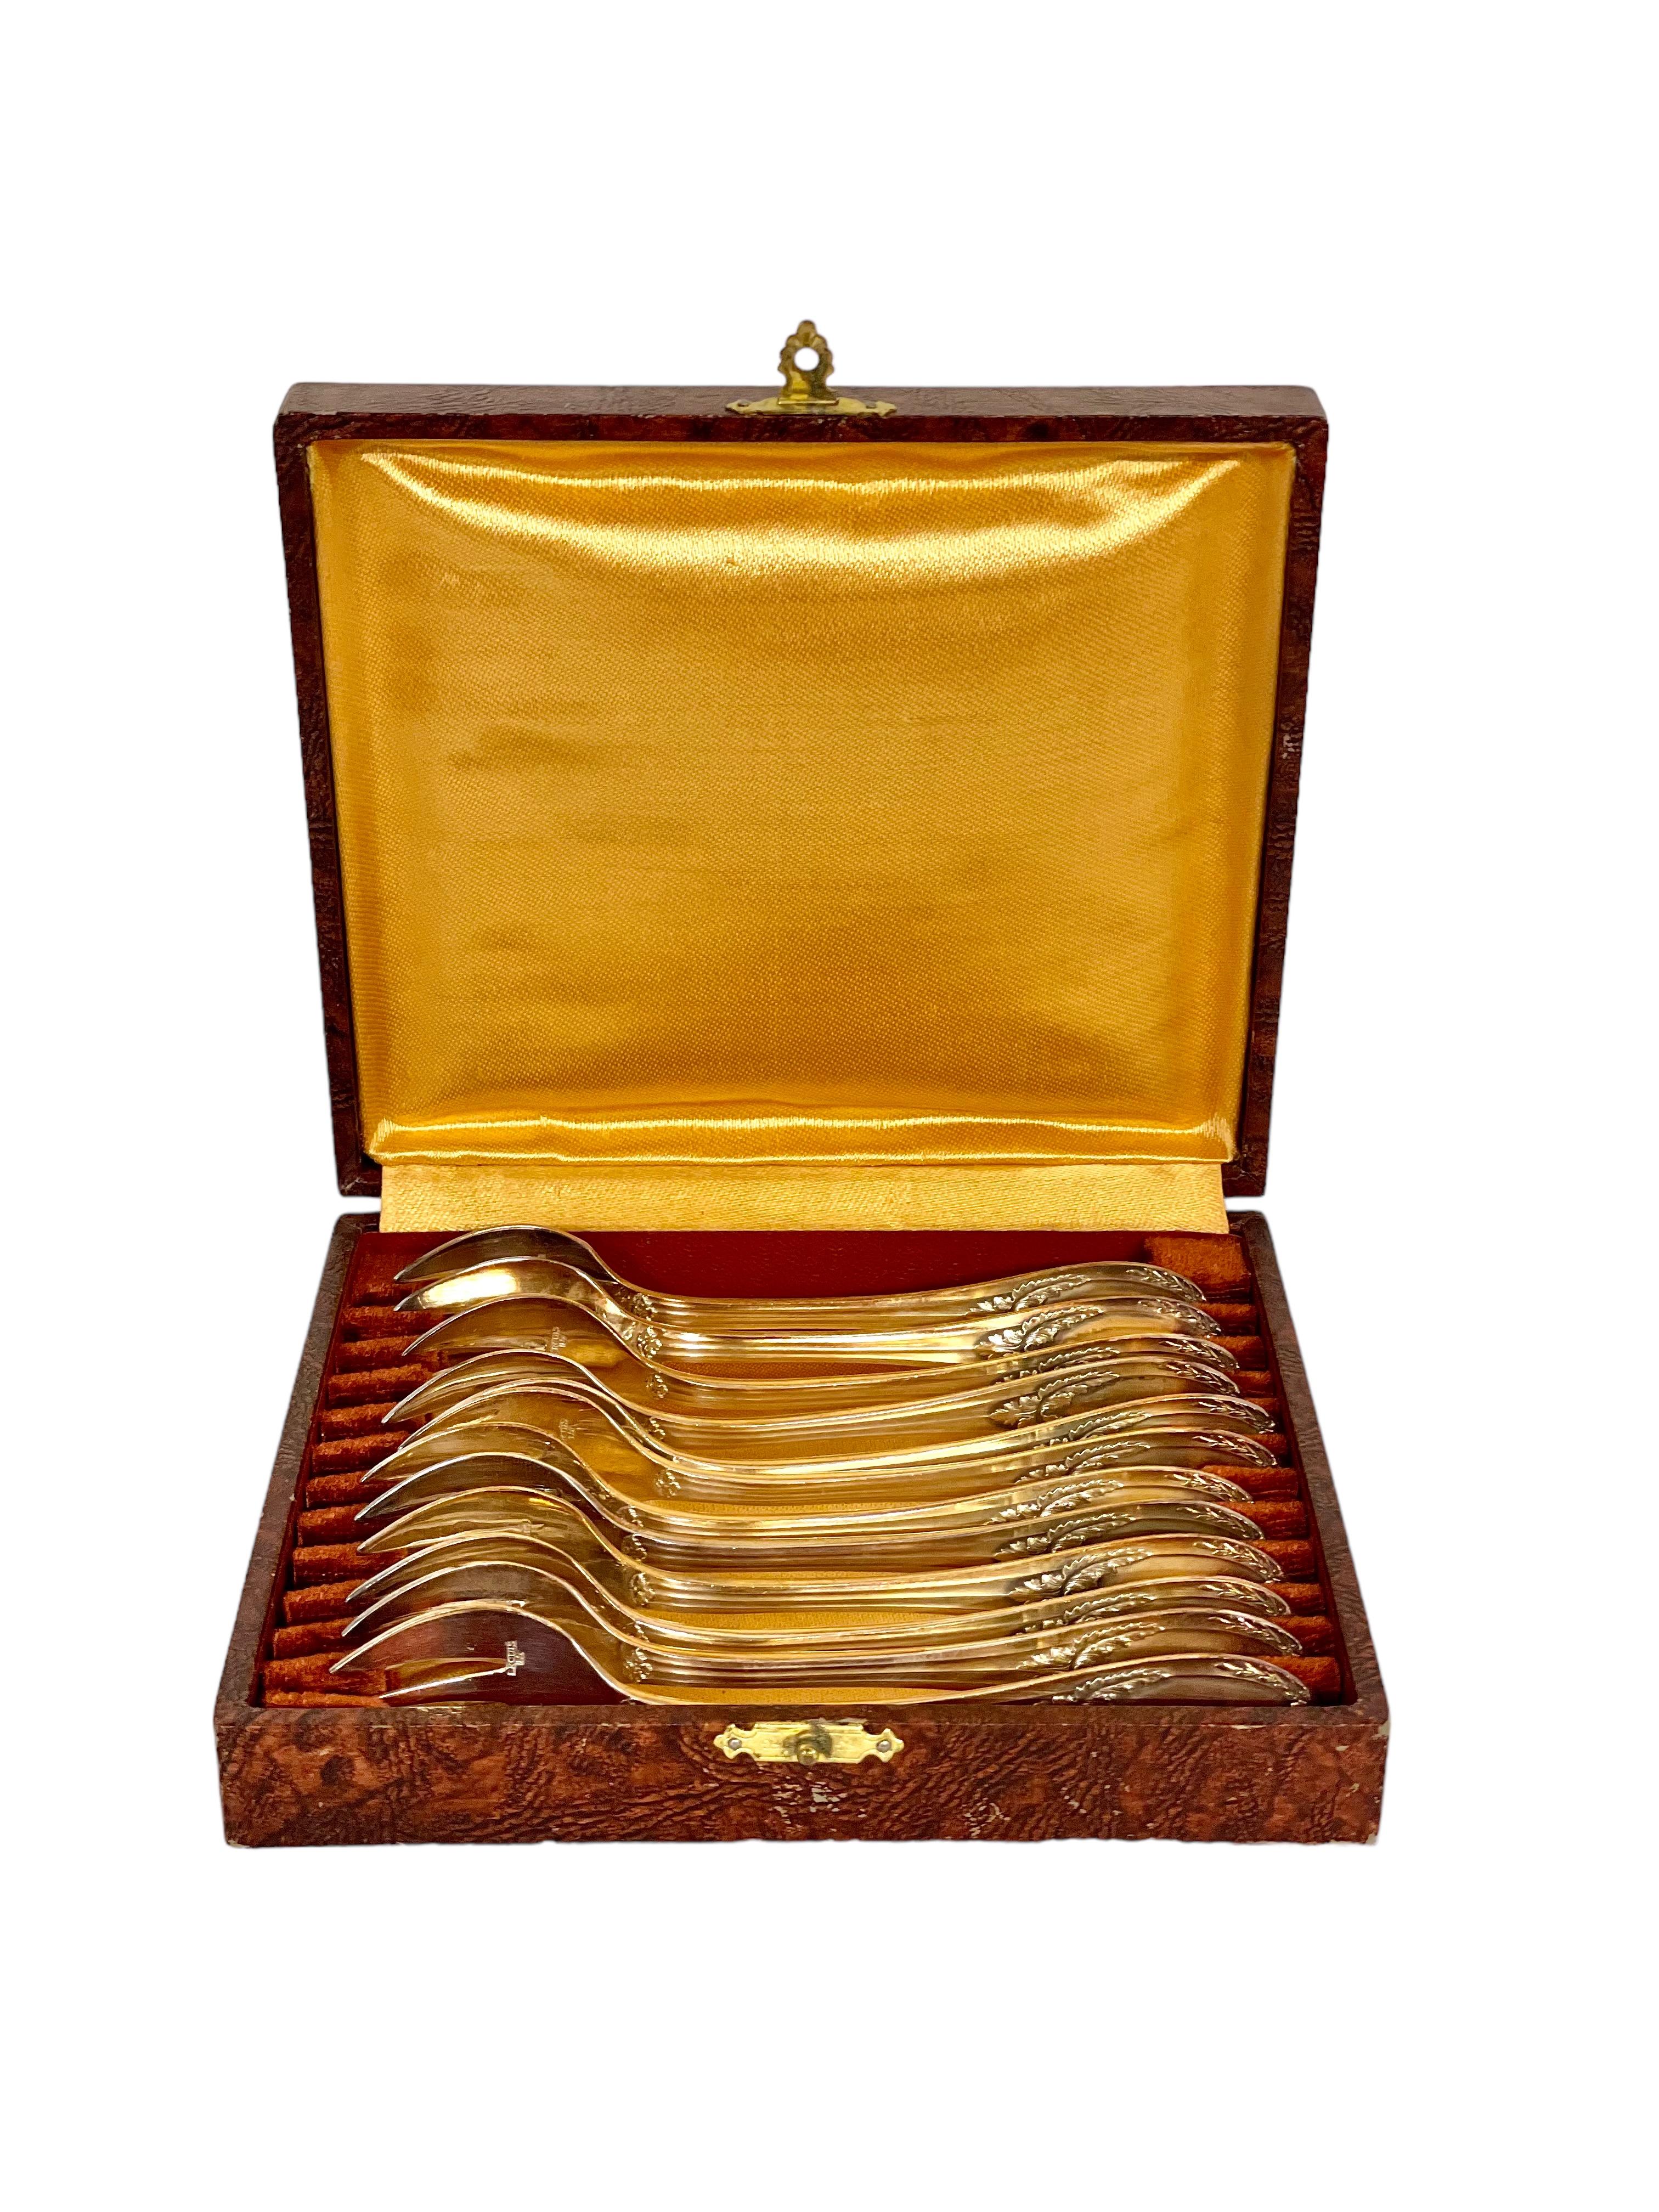 A delightful set of 12 matching vintage silver-plated oyster forks made by renowned French silversmiths Ercuis (founded in 1867) and presented in their original case. Crafted in a Louis XVI style, these forks are each embellished with a beautifully